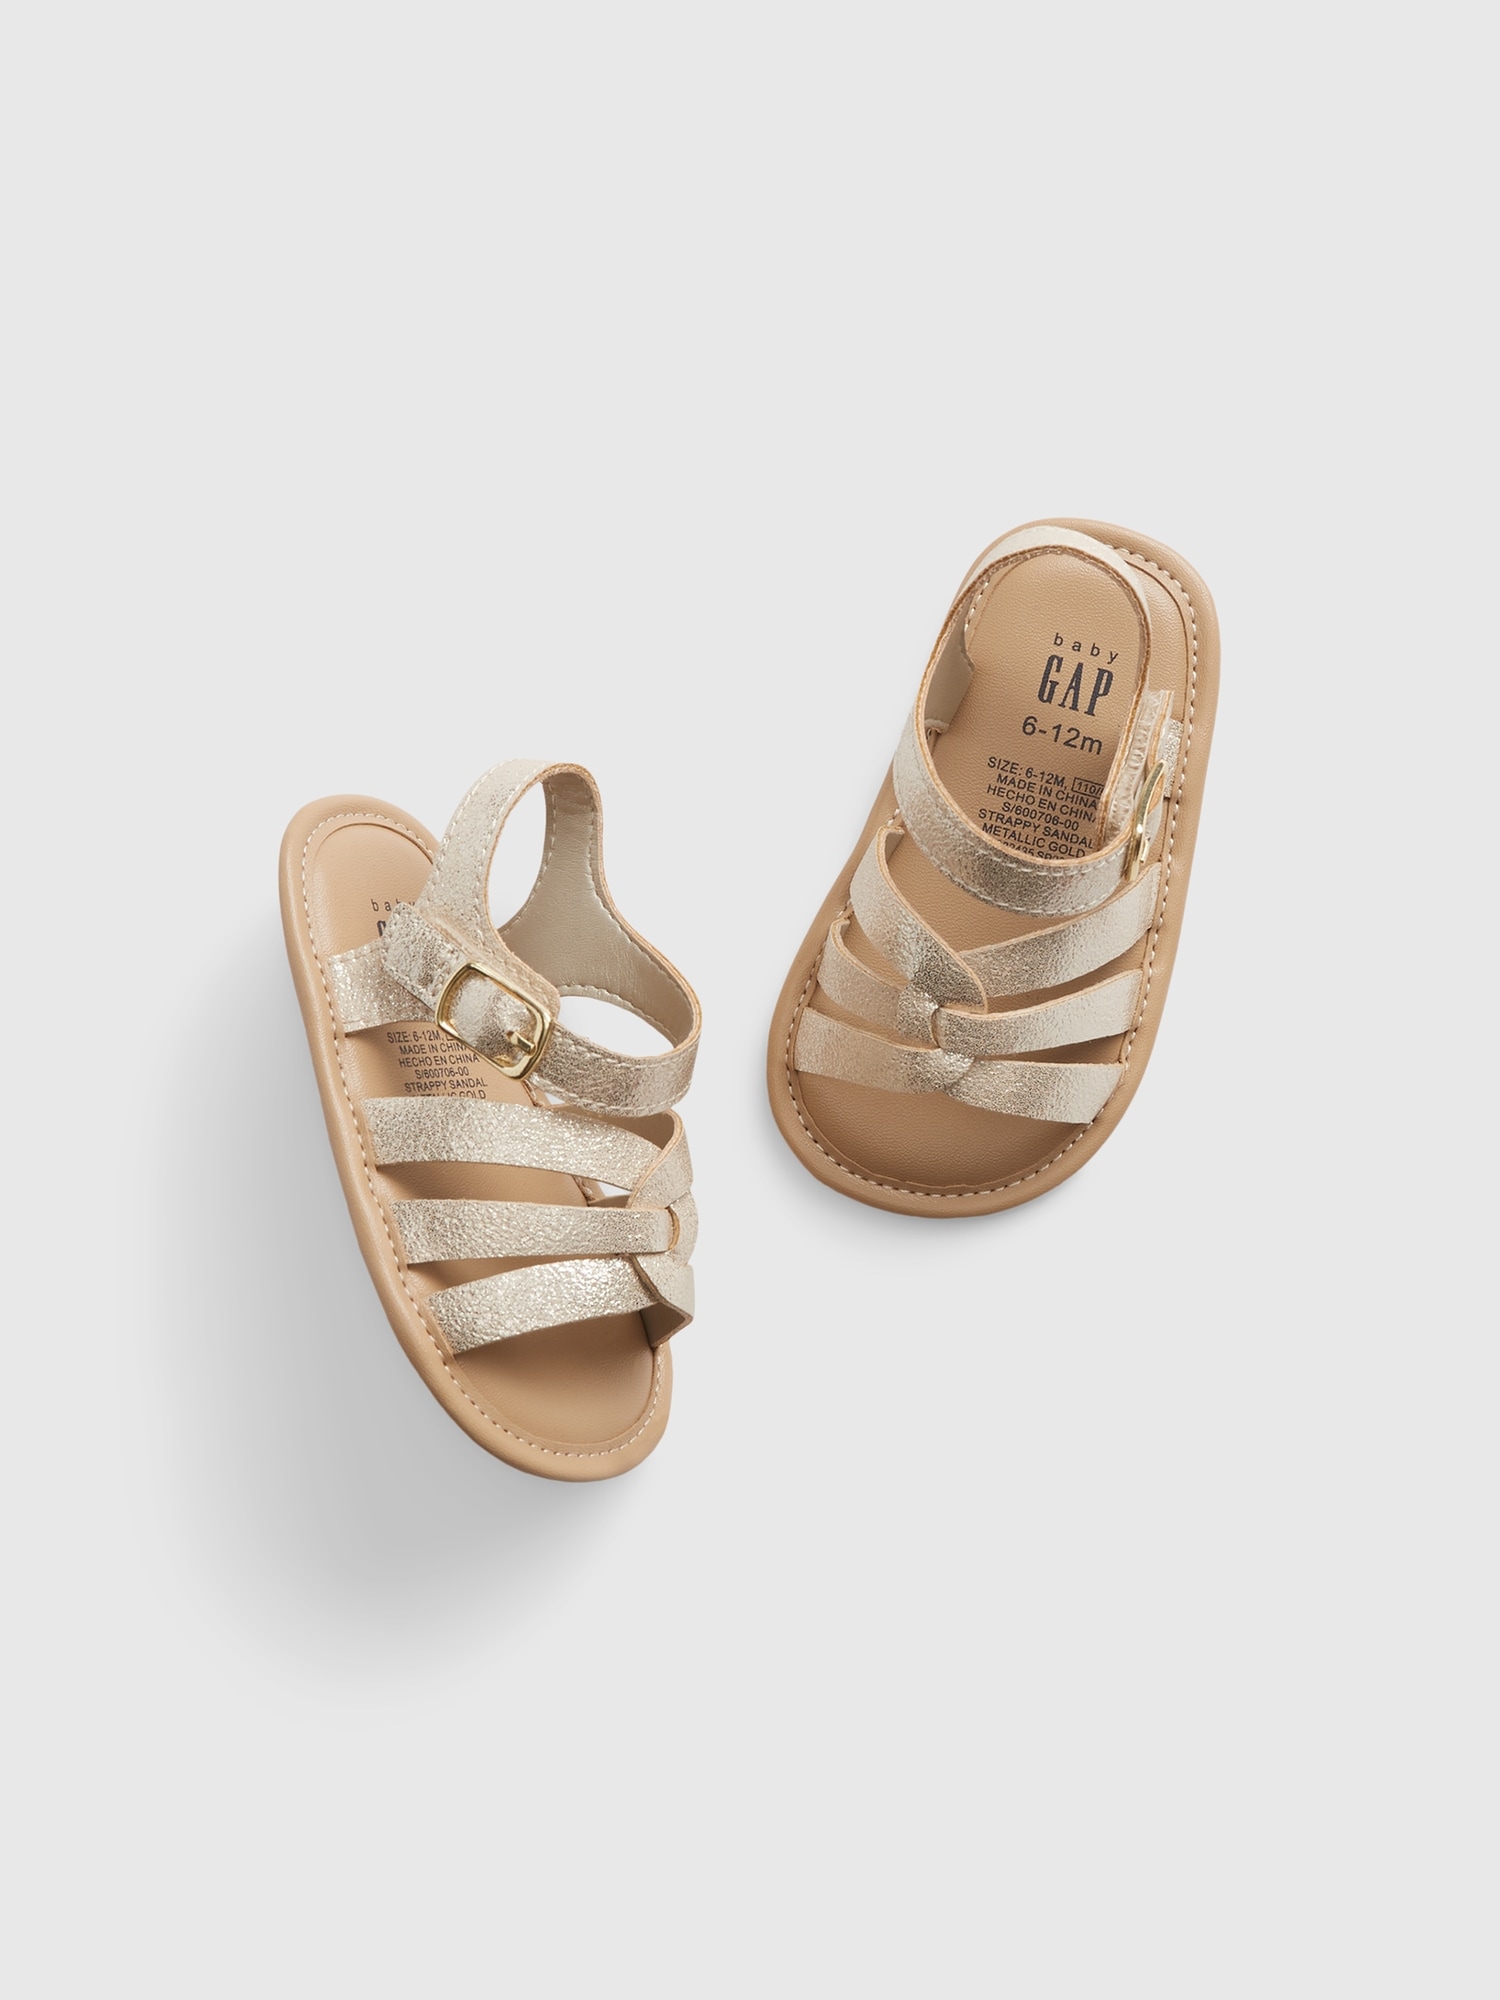 Gap Baby Strappy Sandals gold. 1